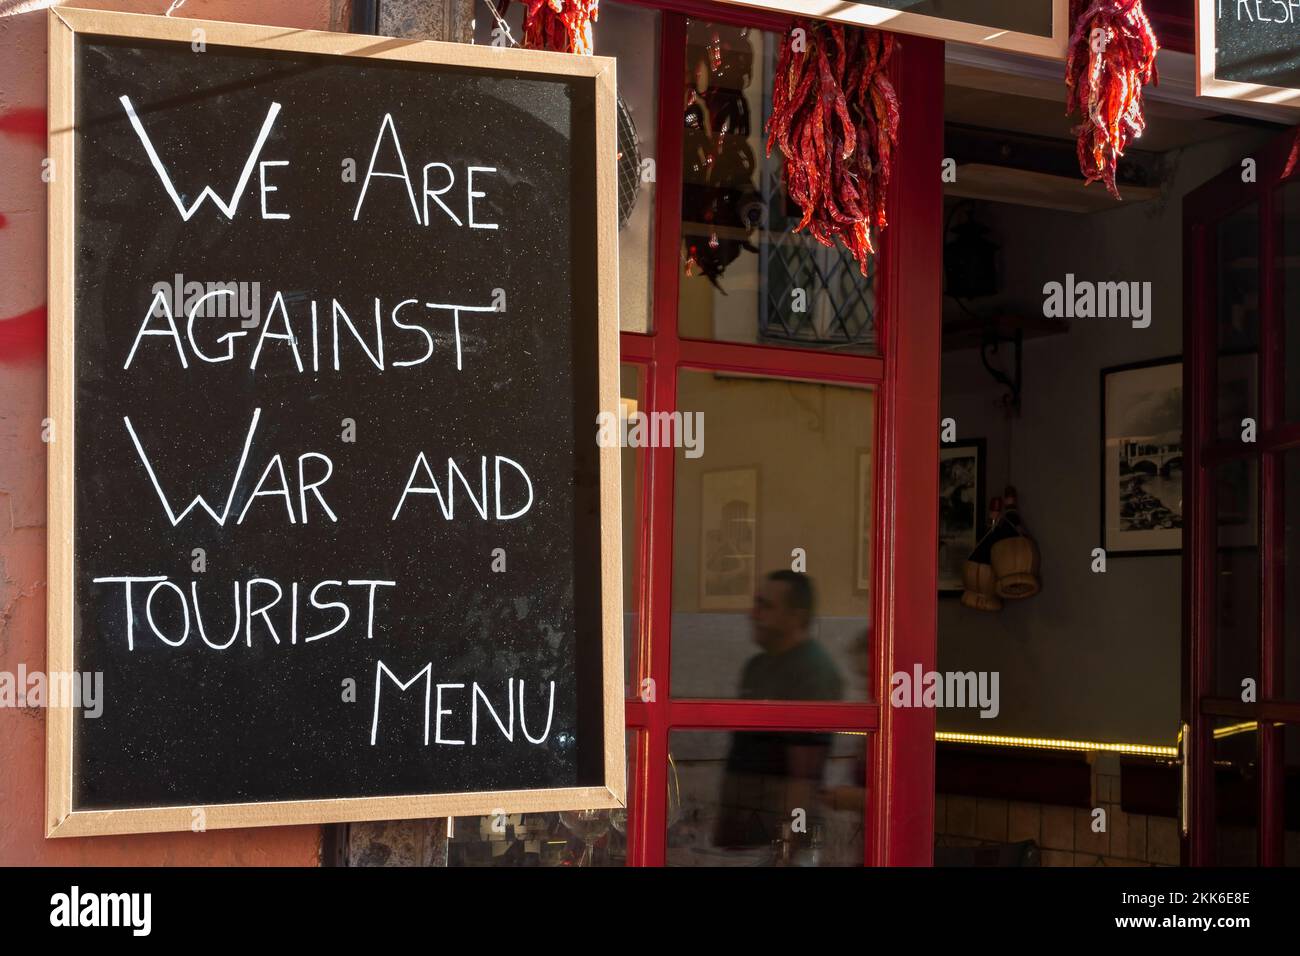 We are against war and tourist menu. Concept ironic peace message against war, on a blackboard, sign outside a restaurant in Rome, Italy, Europe, EU. Stock Photo